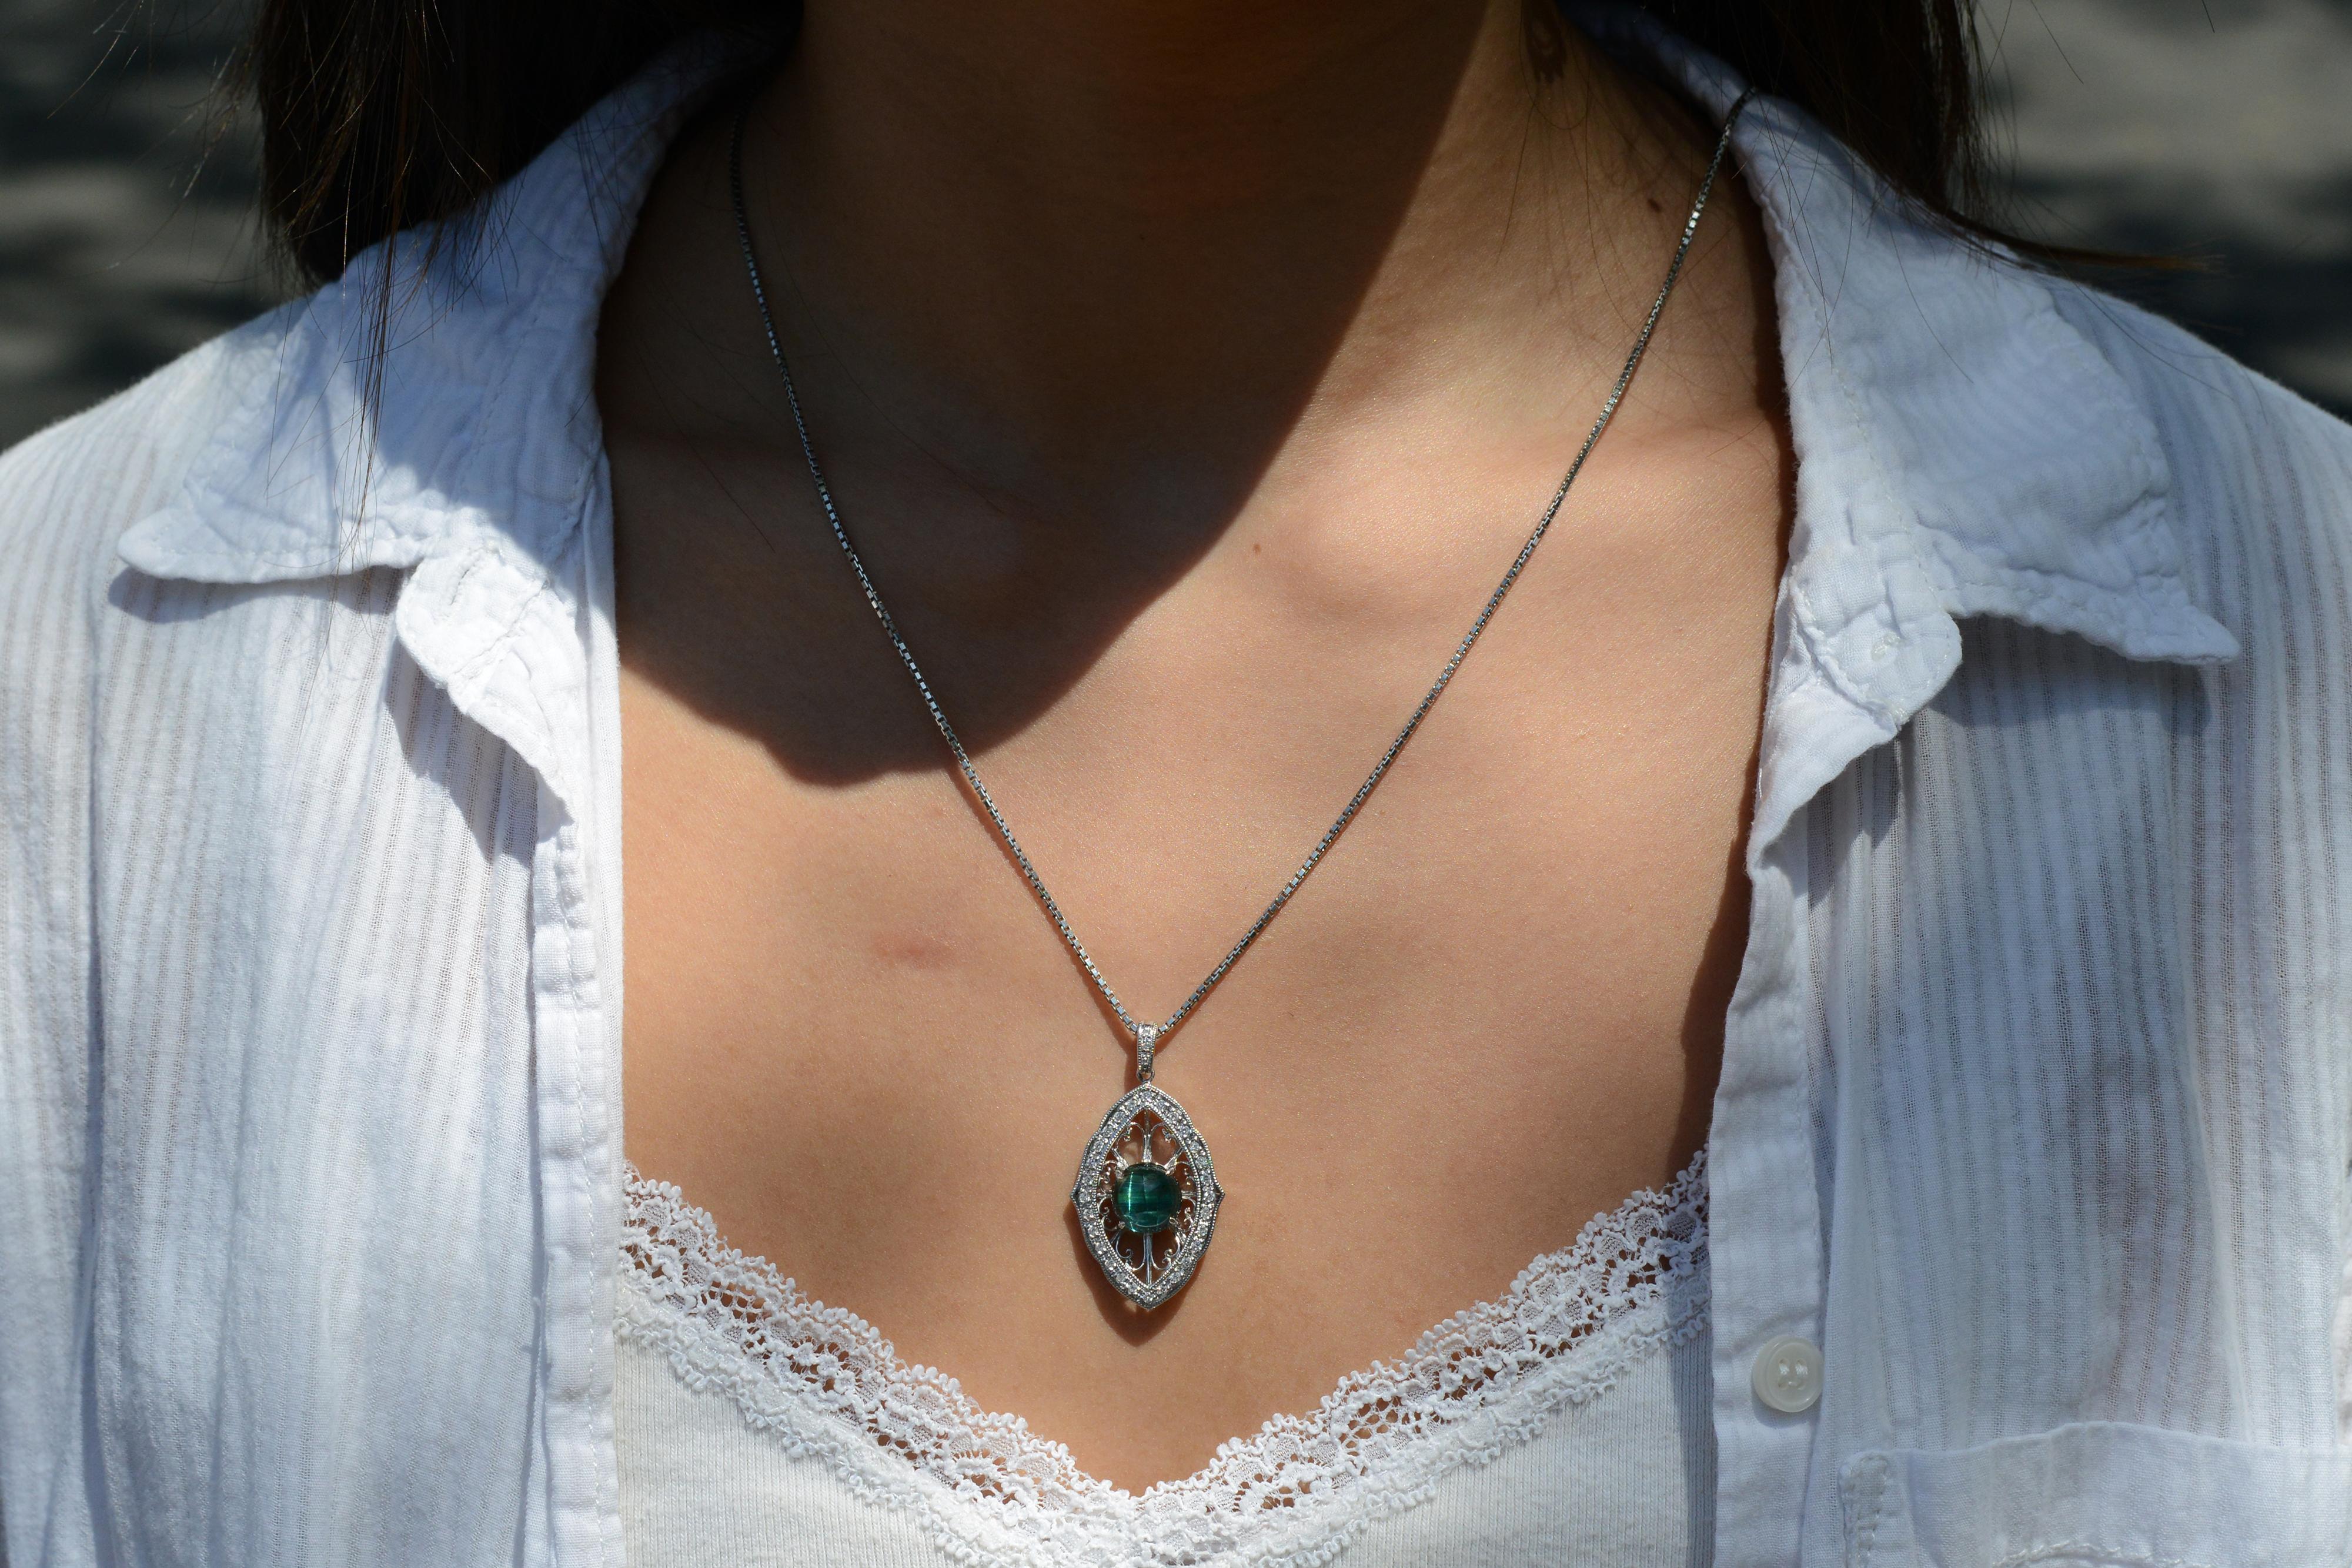 Embrace the revival of the great Art Nouveau era and complement your jewelry collection with this stunning, blue-green indicolite tourmaline pendant. Crafted from platinum with exquisite scrolling vines and milgrain, this necklace showcases a unique